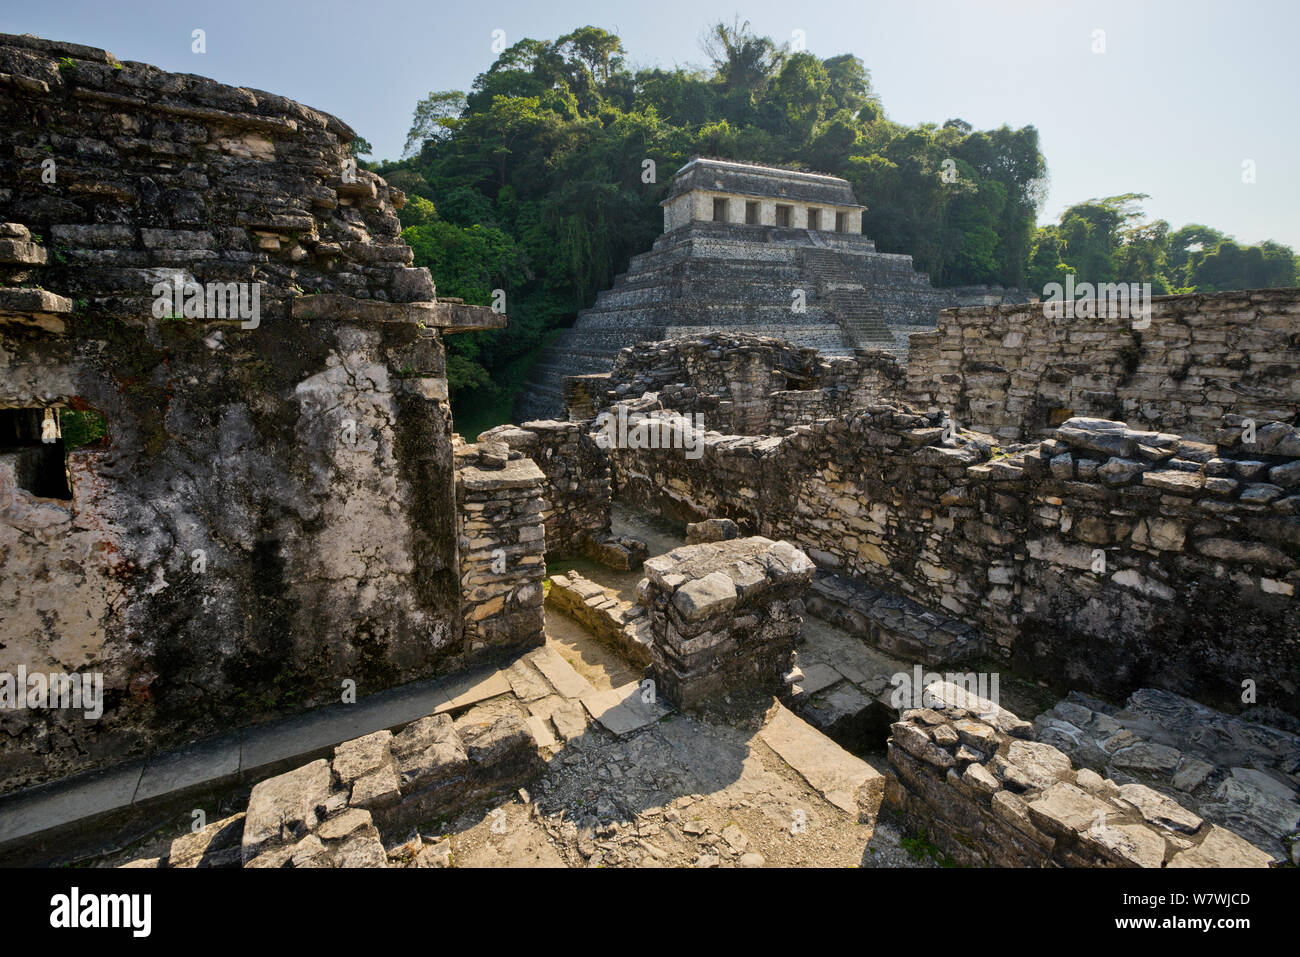 The Palenque Mayan ruins - Temple of the Inscriptions, seen from The Palace, Chiapas, Mexico. March 2014. Stock Photo